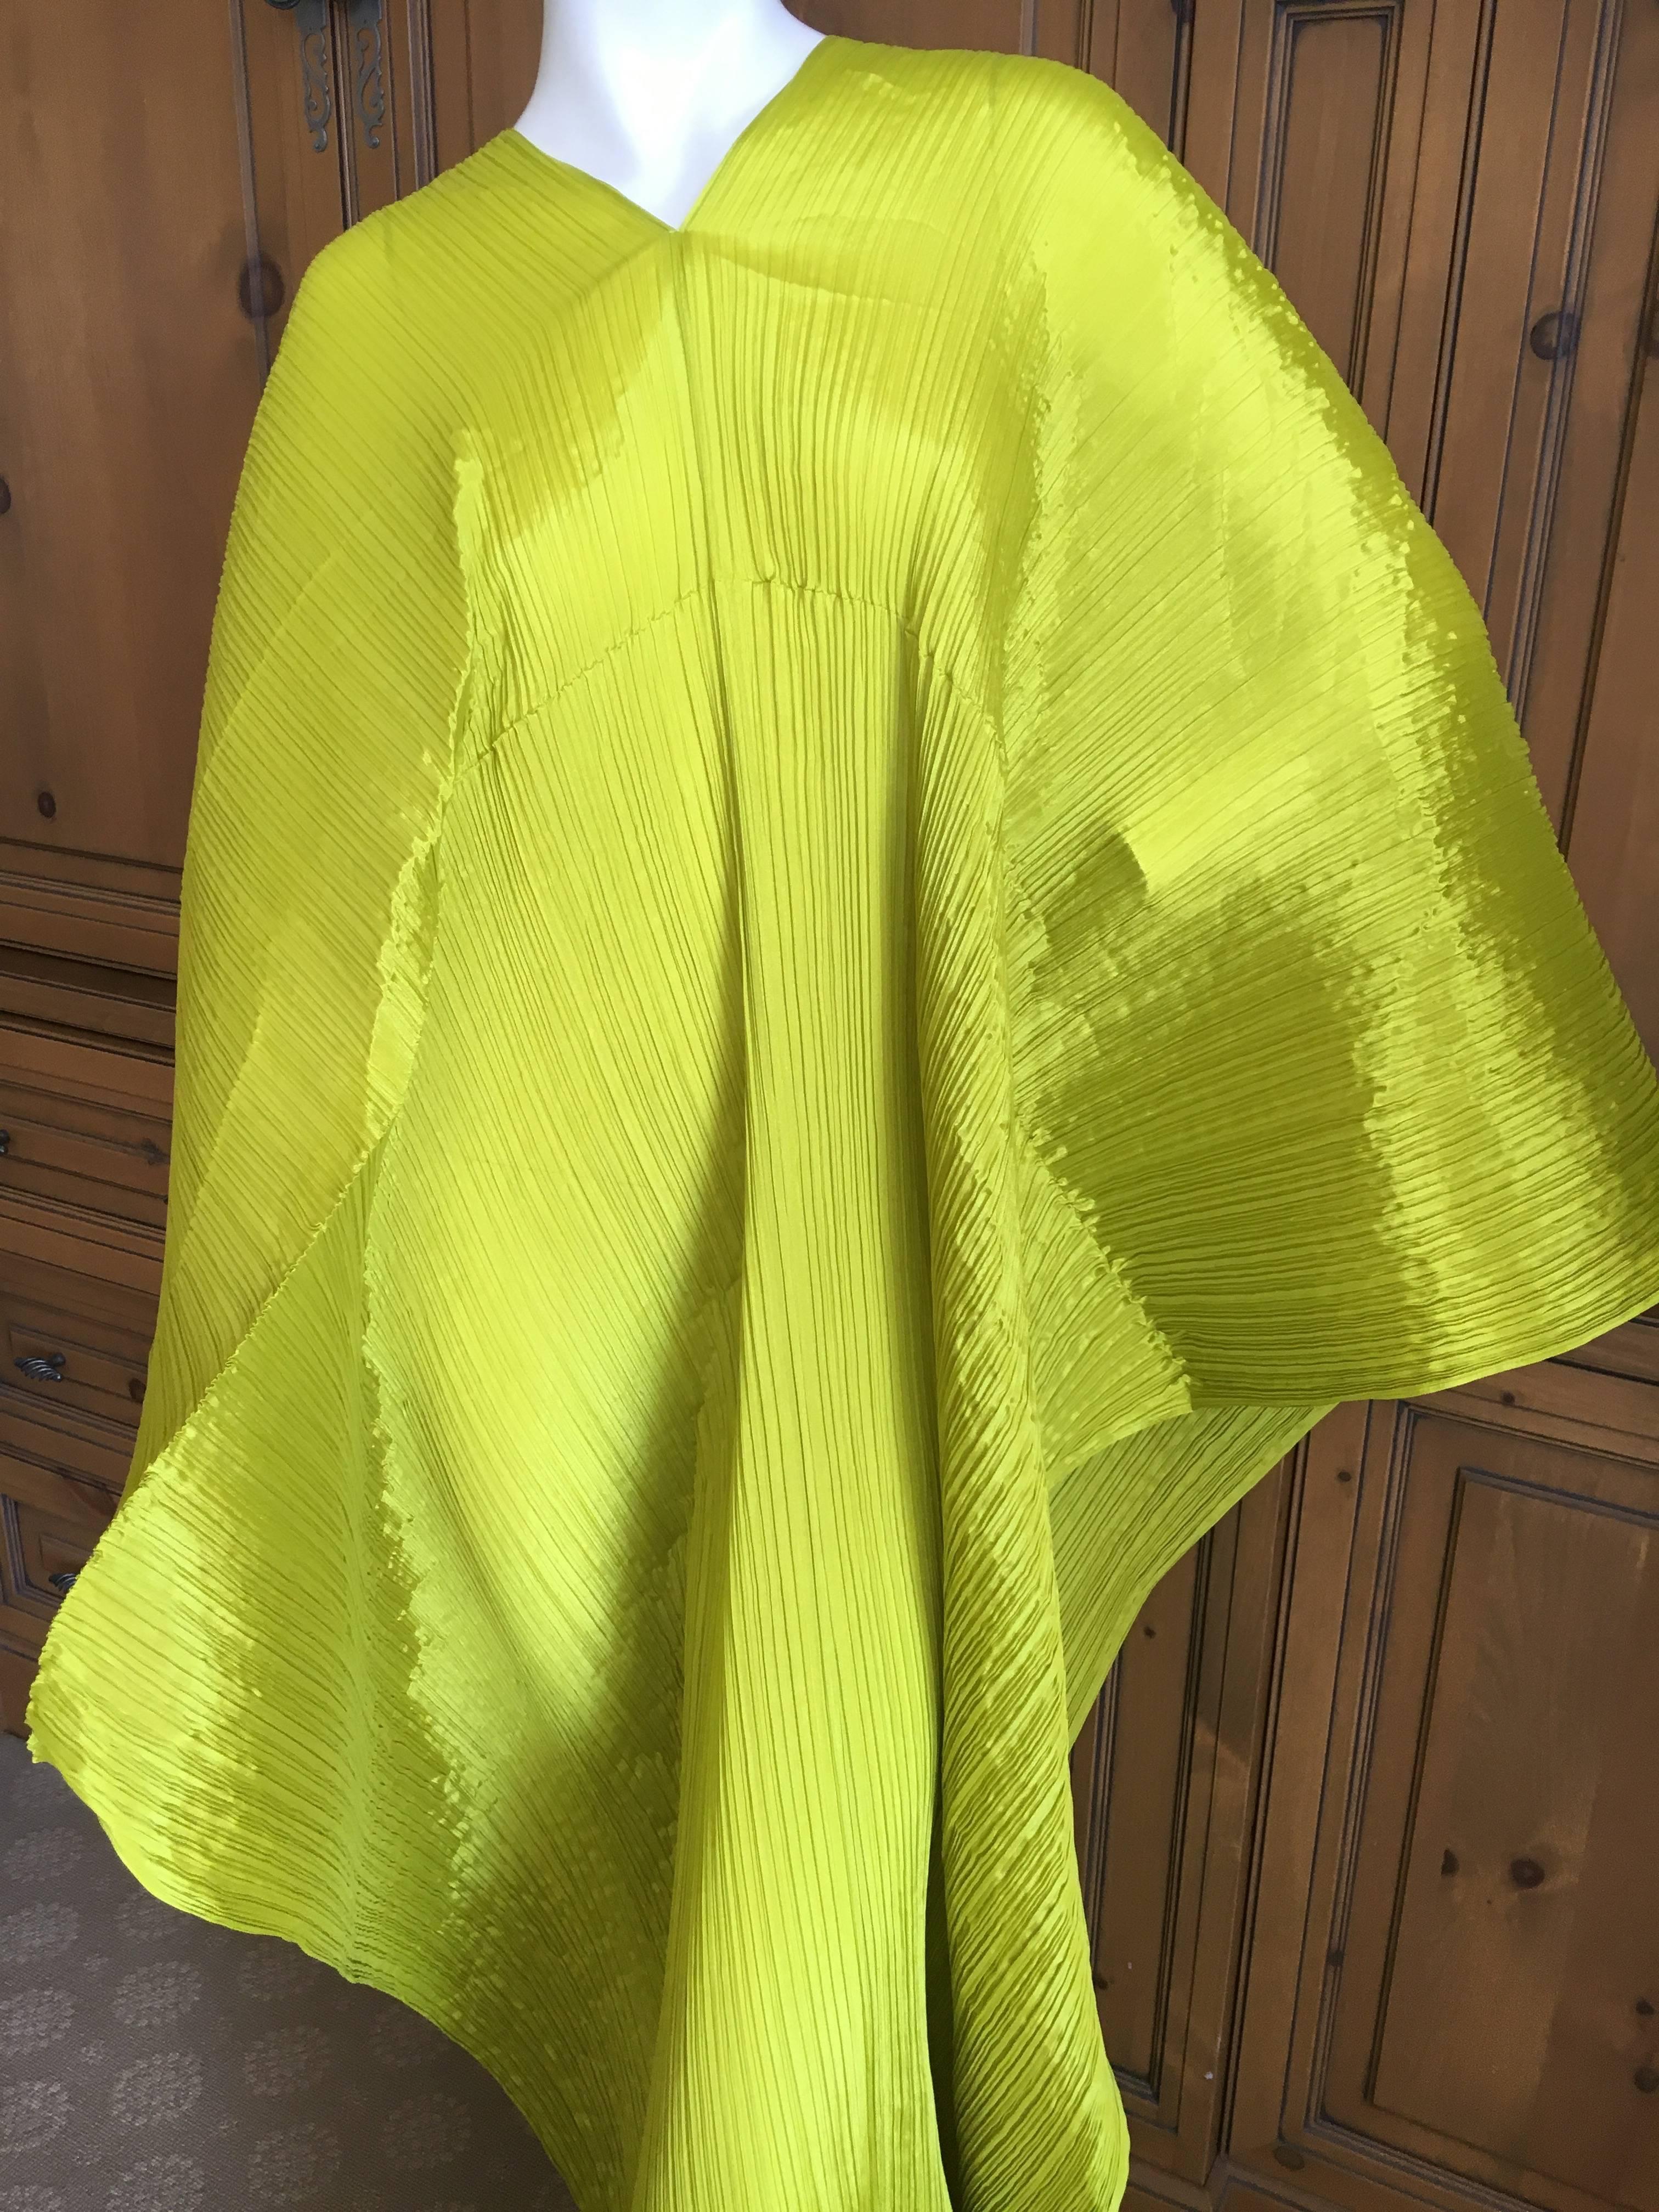 Issey Miyake Sculptural Neon Green Pleated Poncho by Issey Miyake Pleats Please, circa 1999.
Such a wonderful color.
Pleats please is so easy to wear and travel with, it always looks fresh.
Great beach wrap.